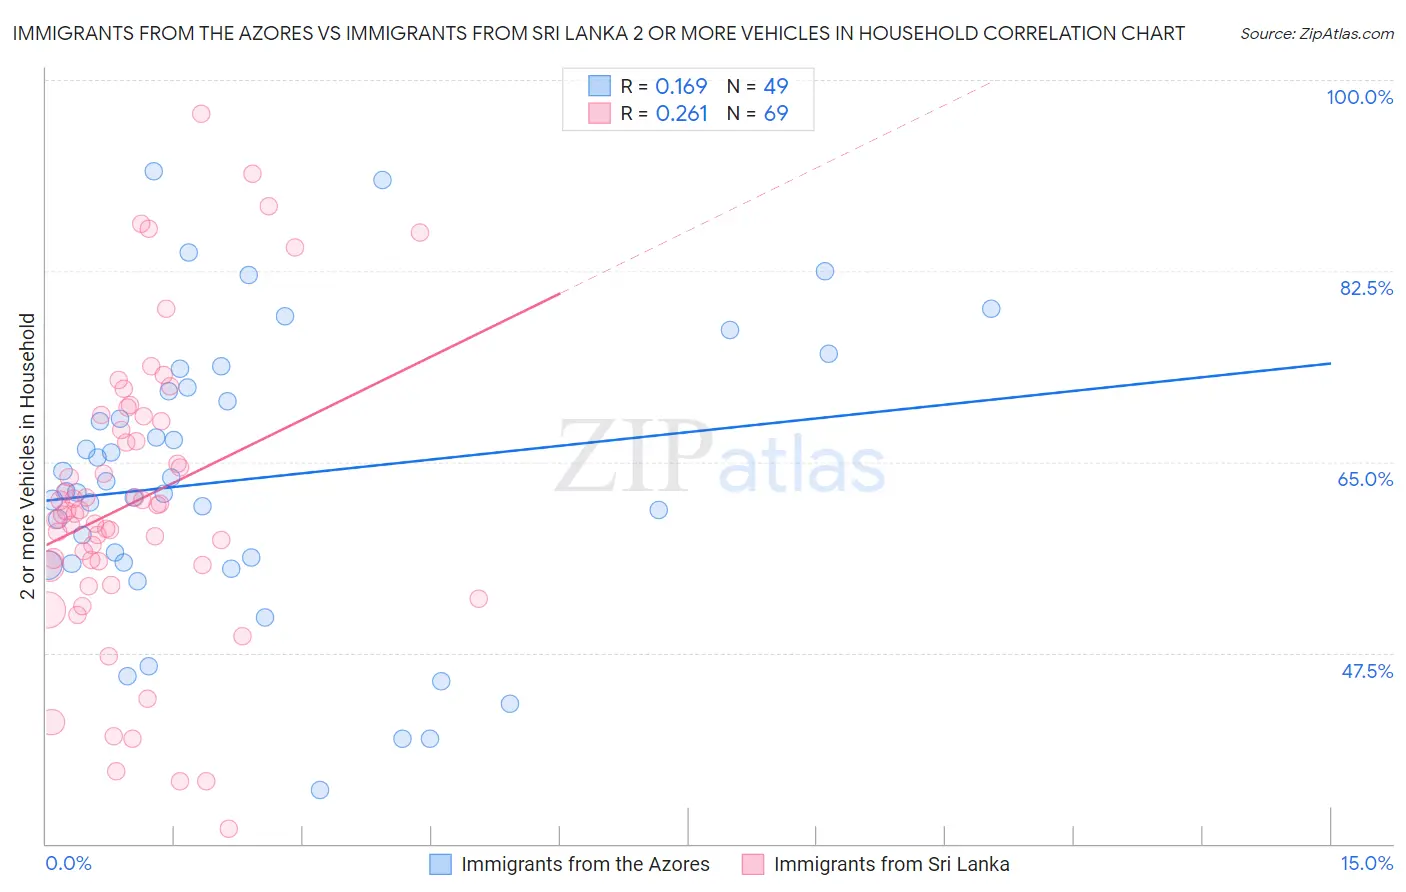 Immigrants from the Azores vs Immigrants from Sri Lanka 2 or more Vehicles in Household